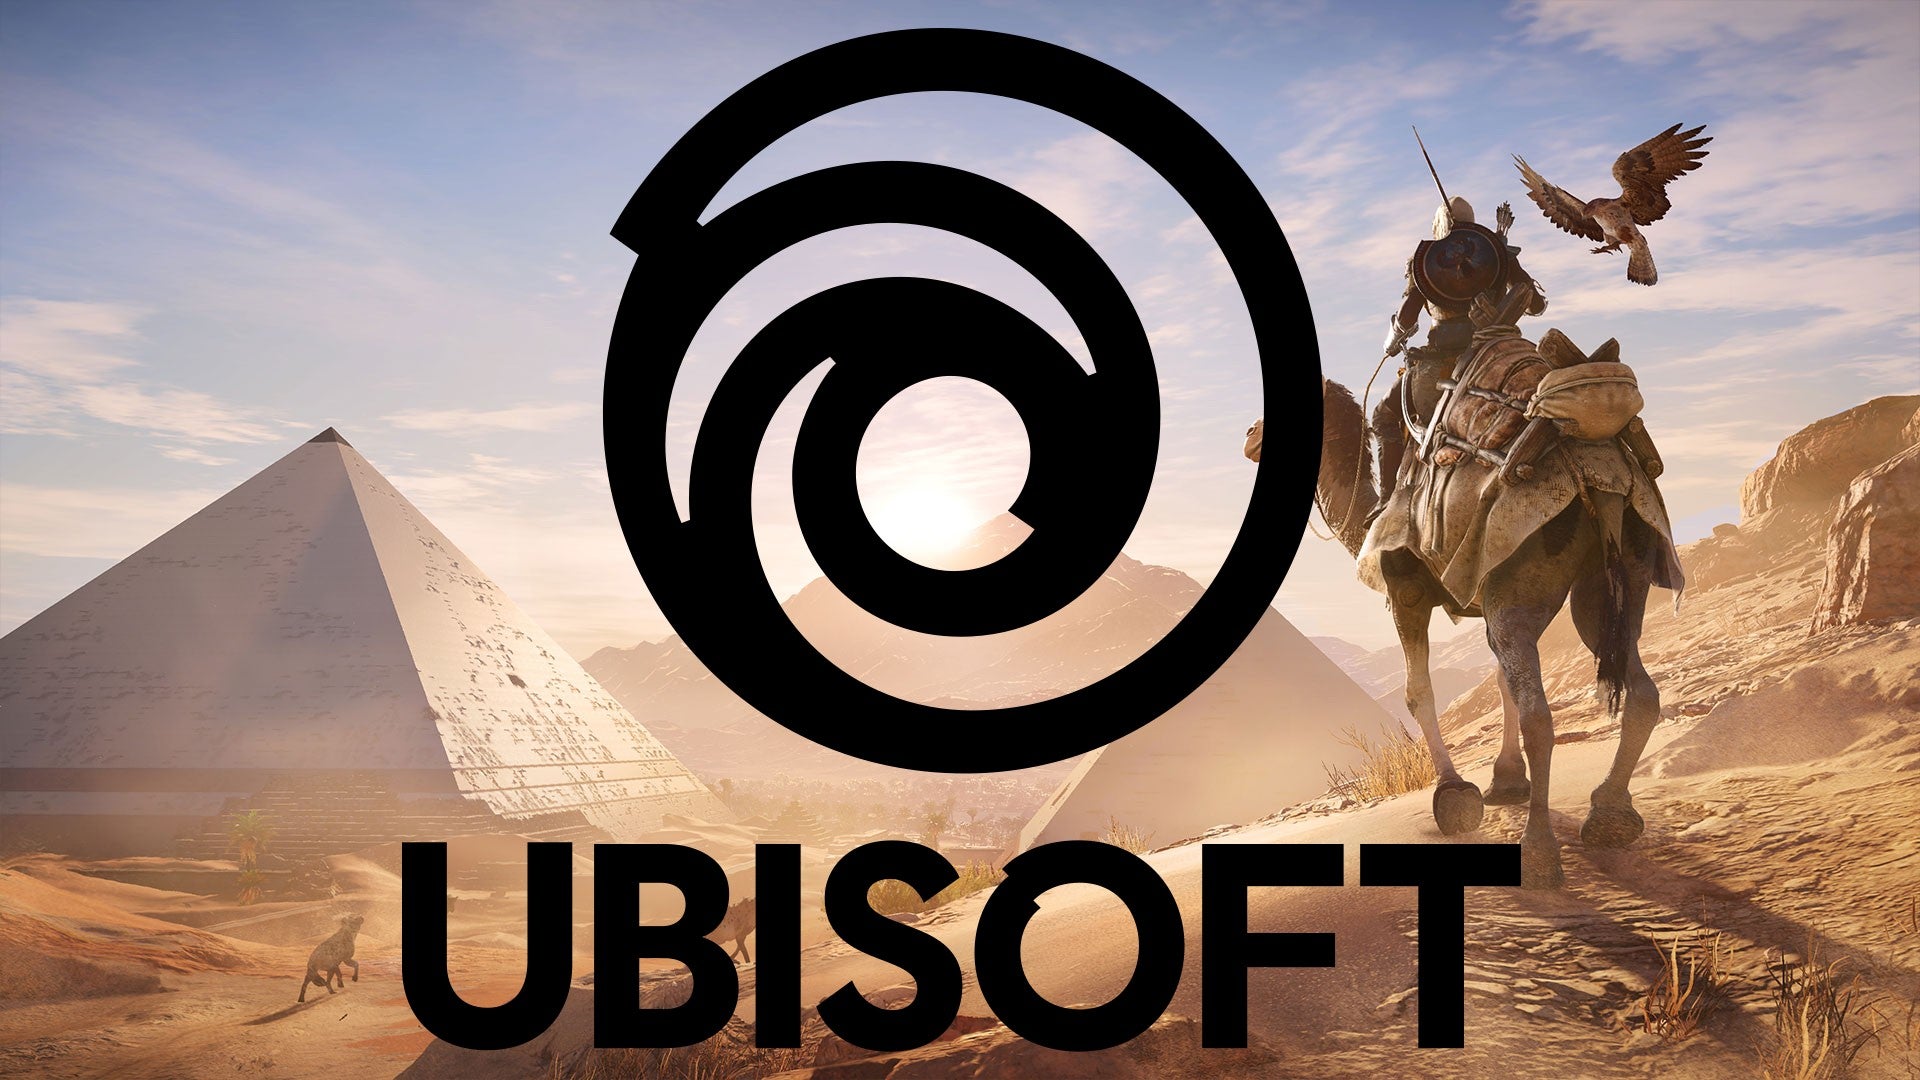 Image for Ubisoft chief exec takes sizeable pay cut after company's poor performance